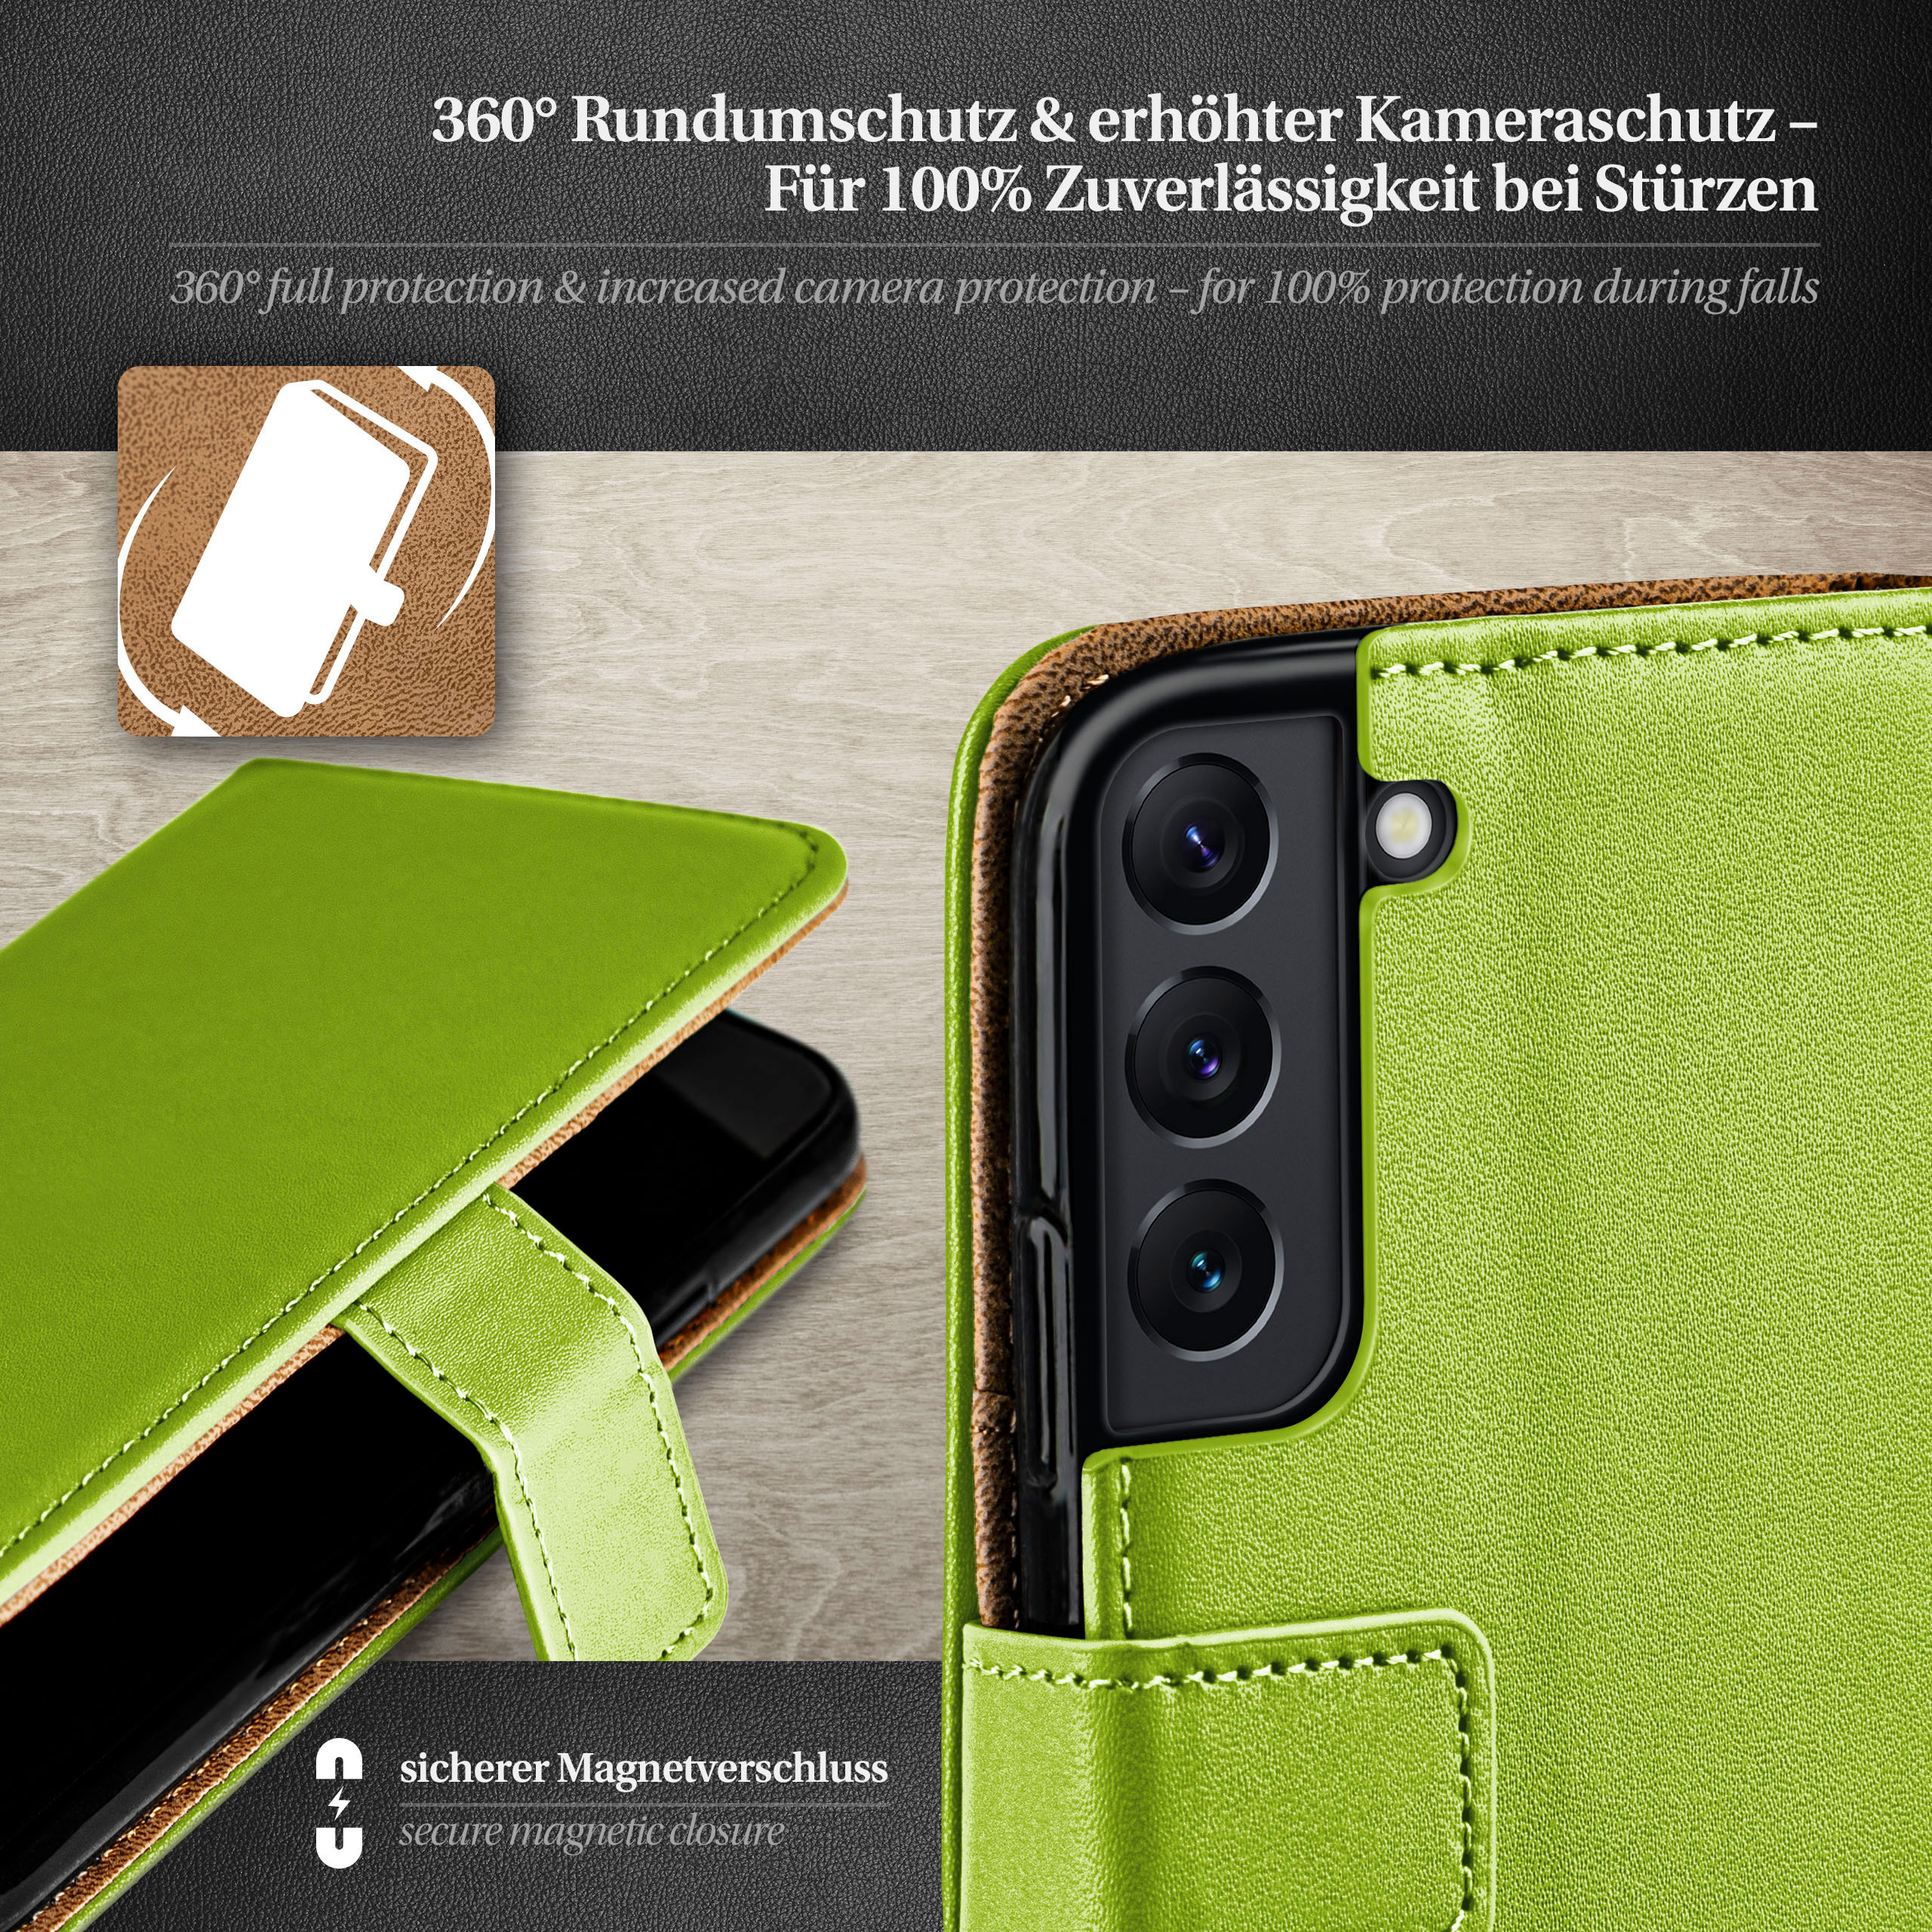 Bookcover, Book S22 Plus, Case, Lime-Green Galaxy MOEX Samsung,